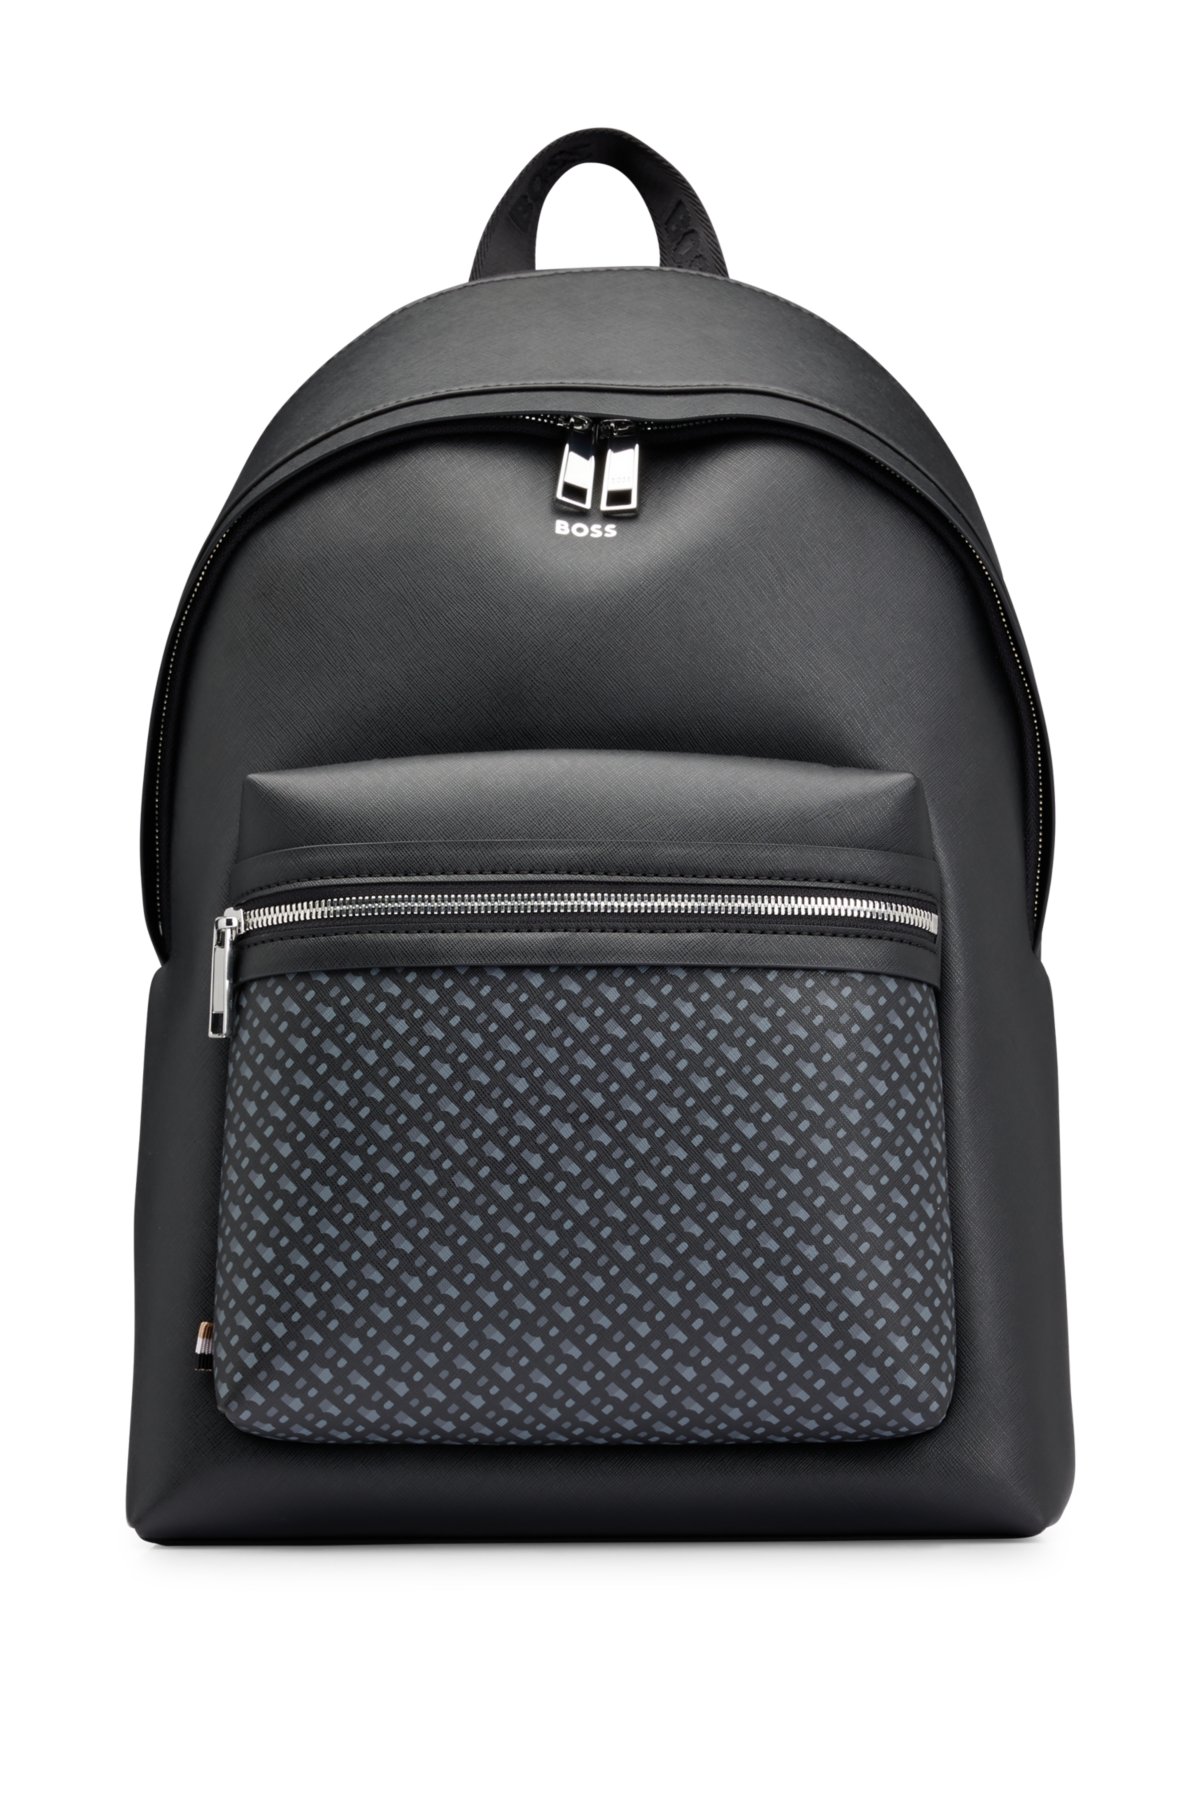 BOSS - Structured backpack with monogram detailing